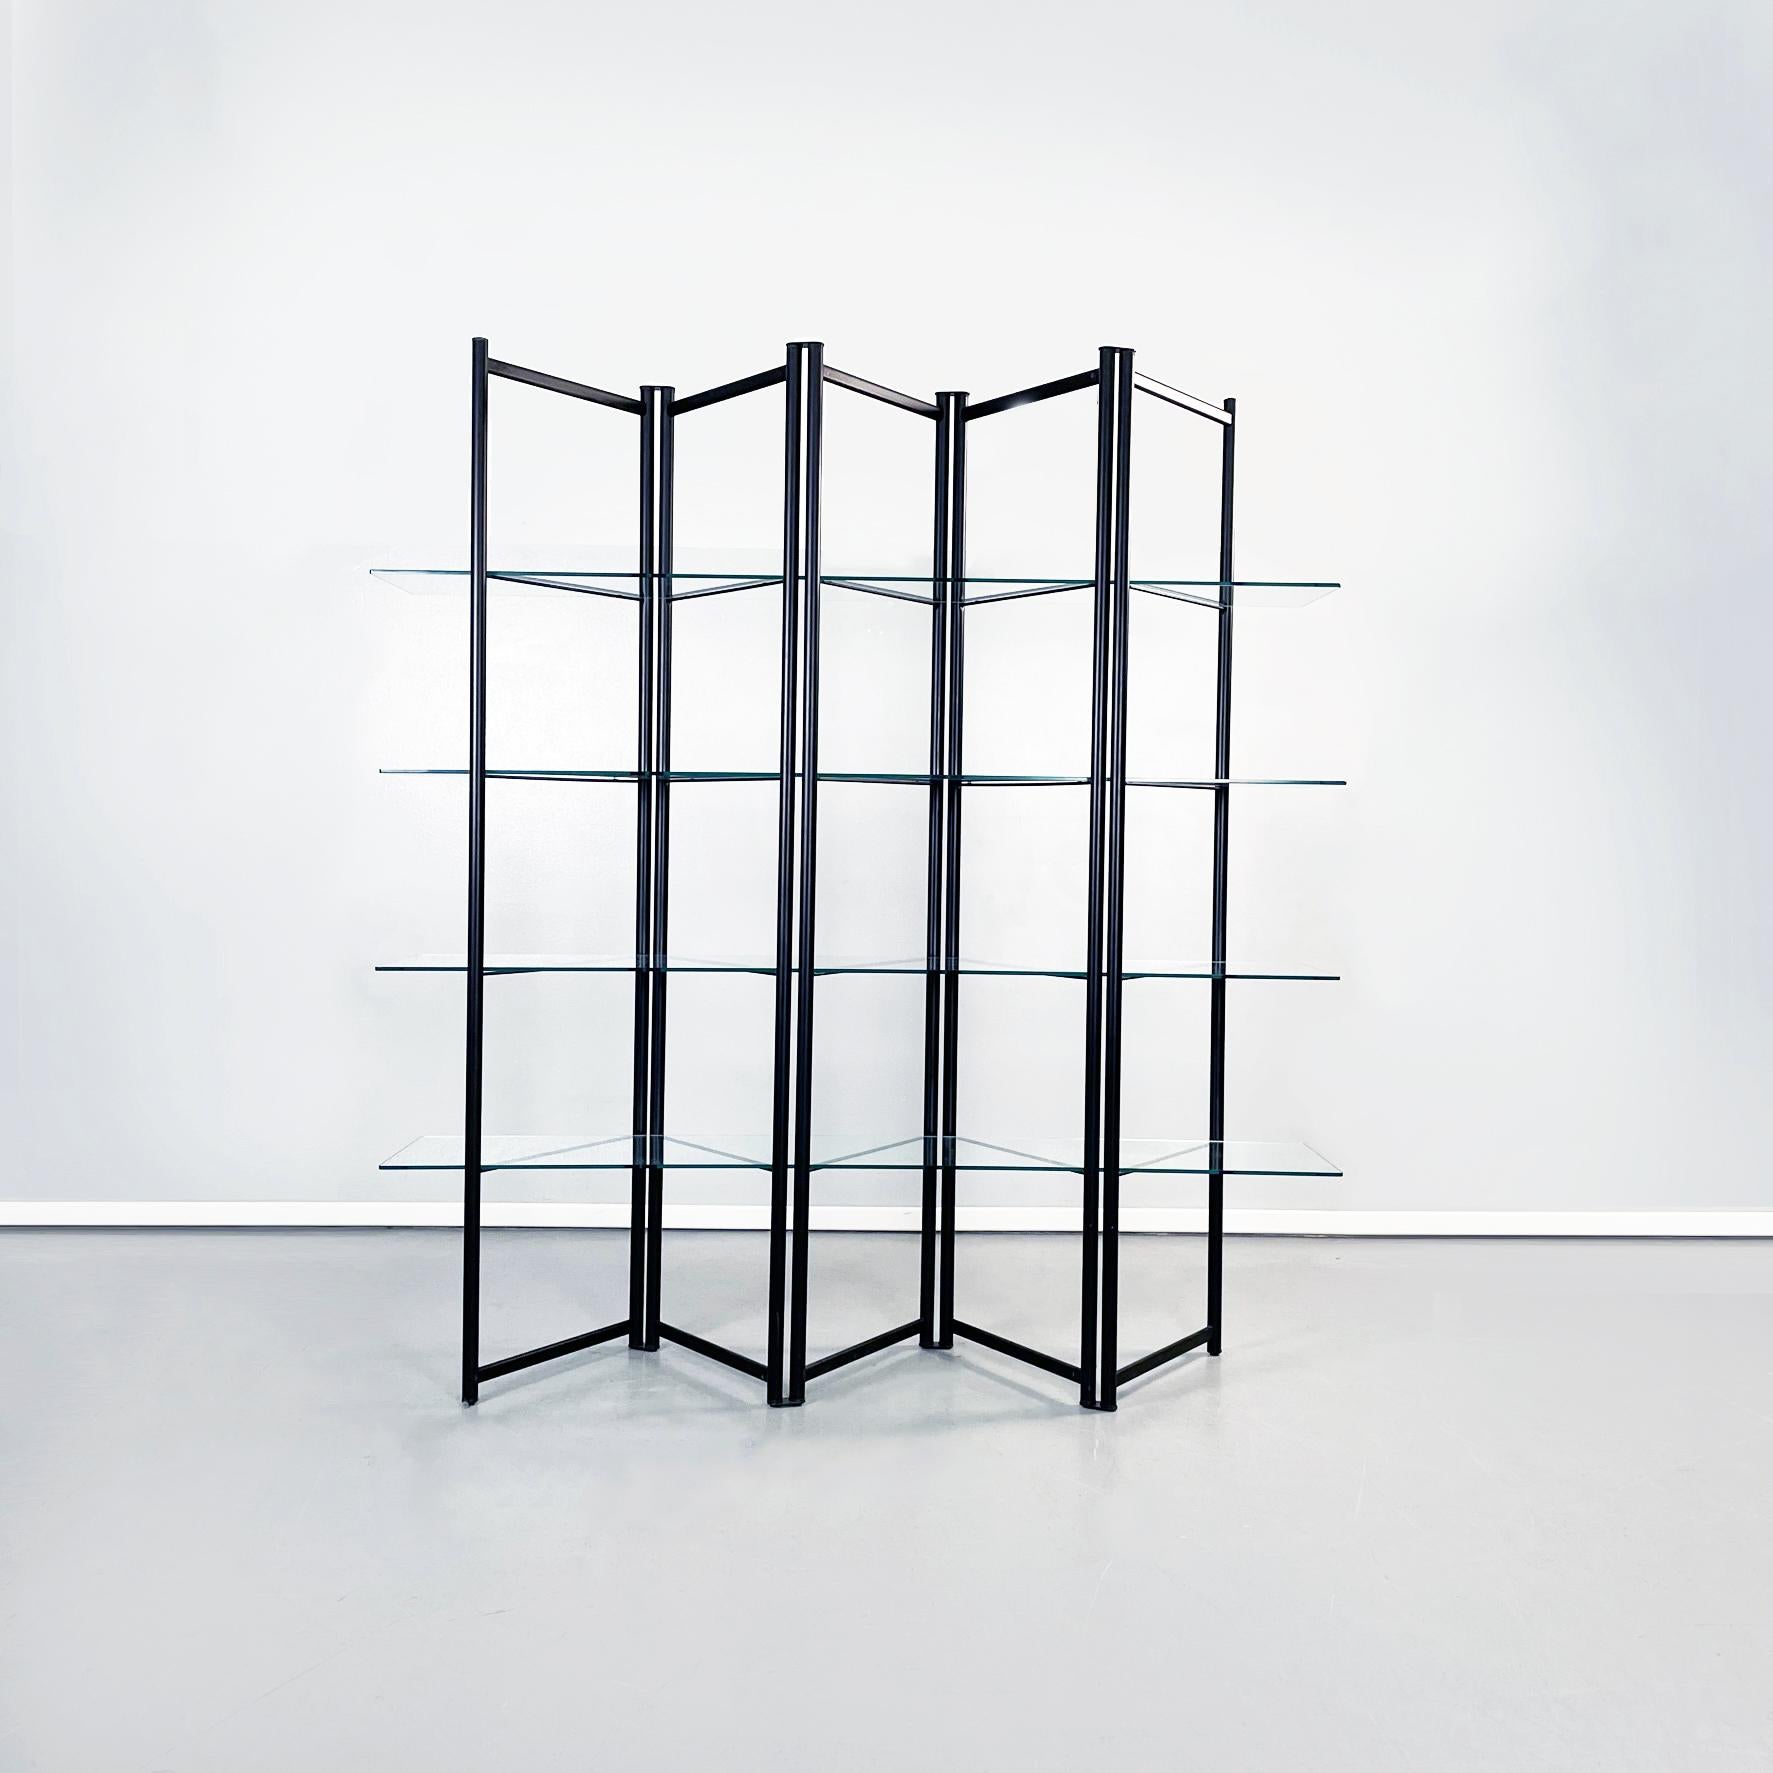 Italian modern black metal and tempered glass bookcase, 1990s
Floor bookcase composed of 4 rectangular shelves in tempered glass. The accordion structure, on which the glass rests, is in black painted metal. The bookcase can be completely